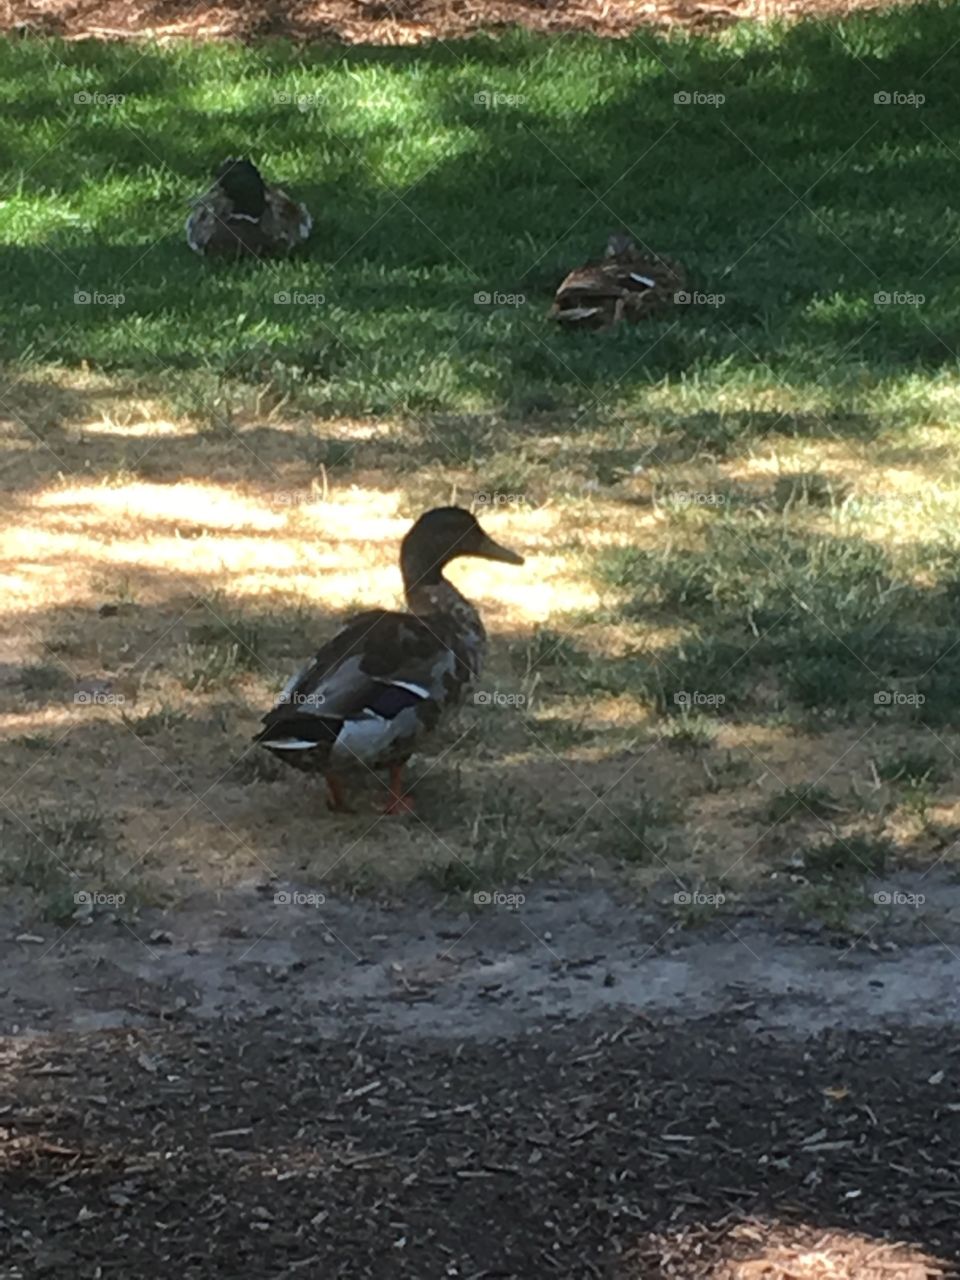 Saw a duck, so snapped a picture 